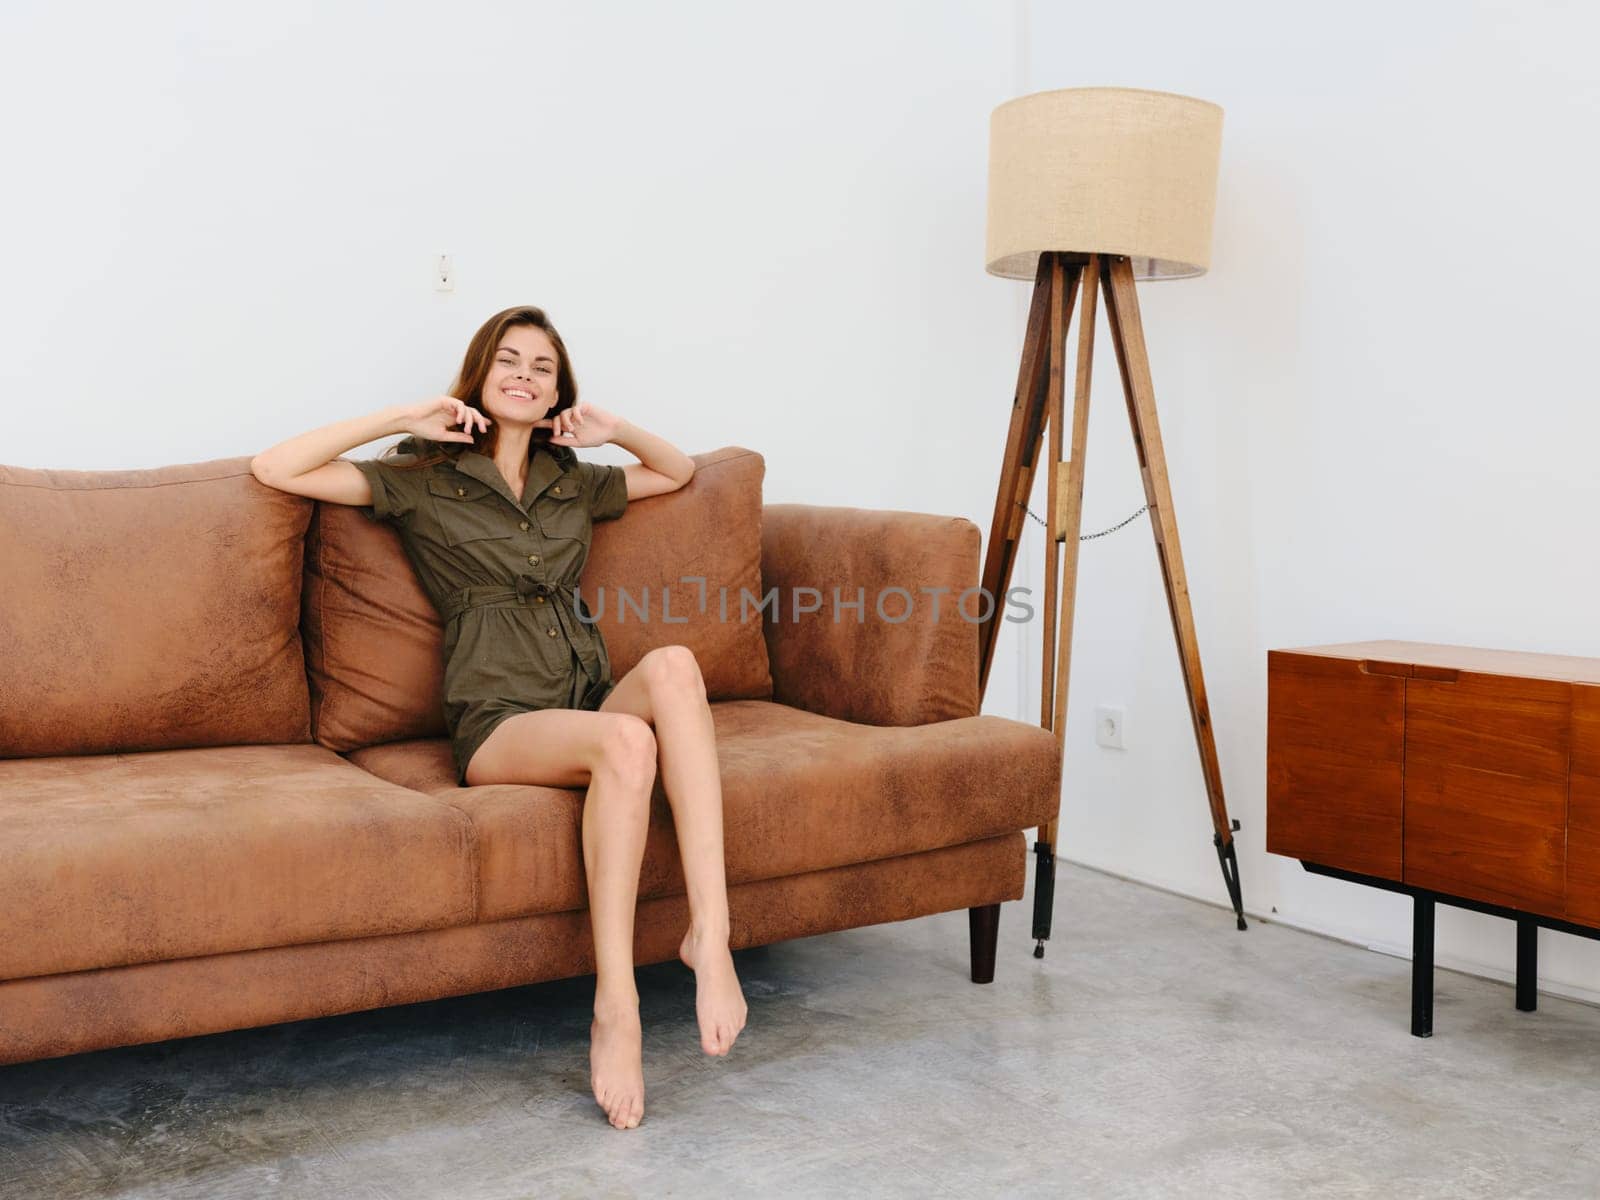 A person sitting in a living room by SHOTPRIME